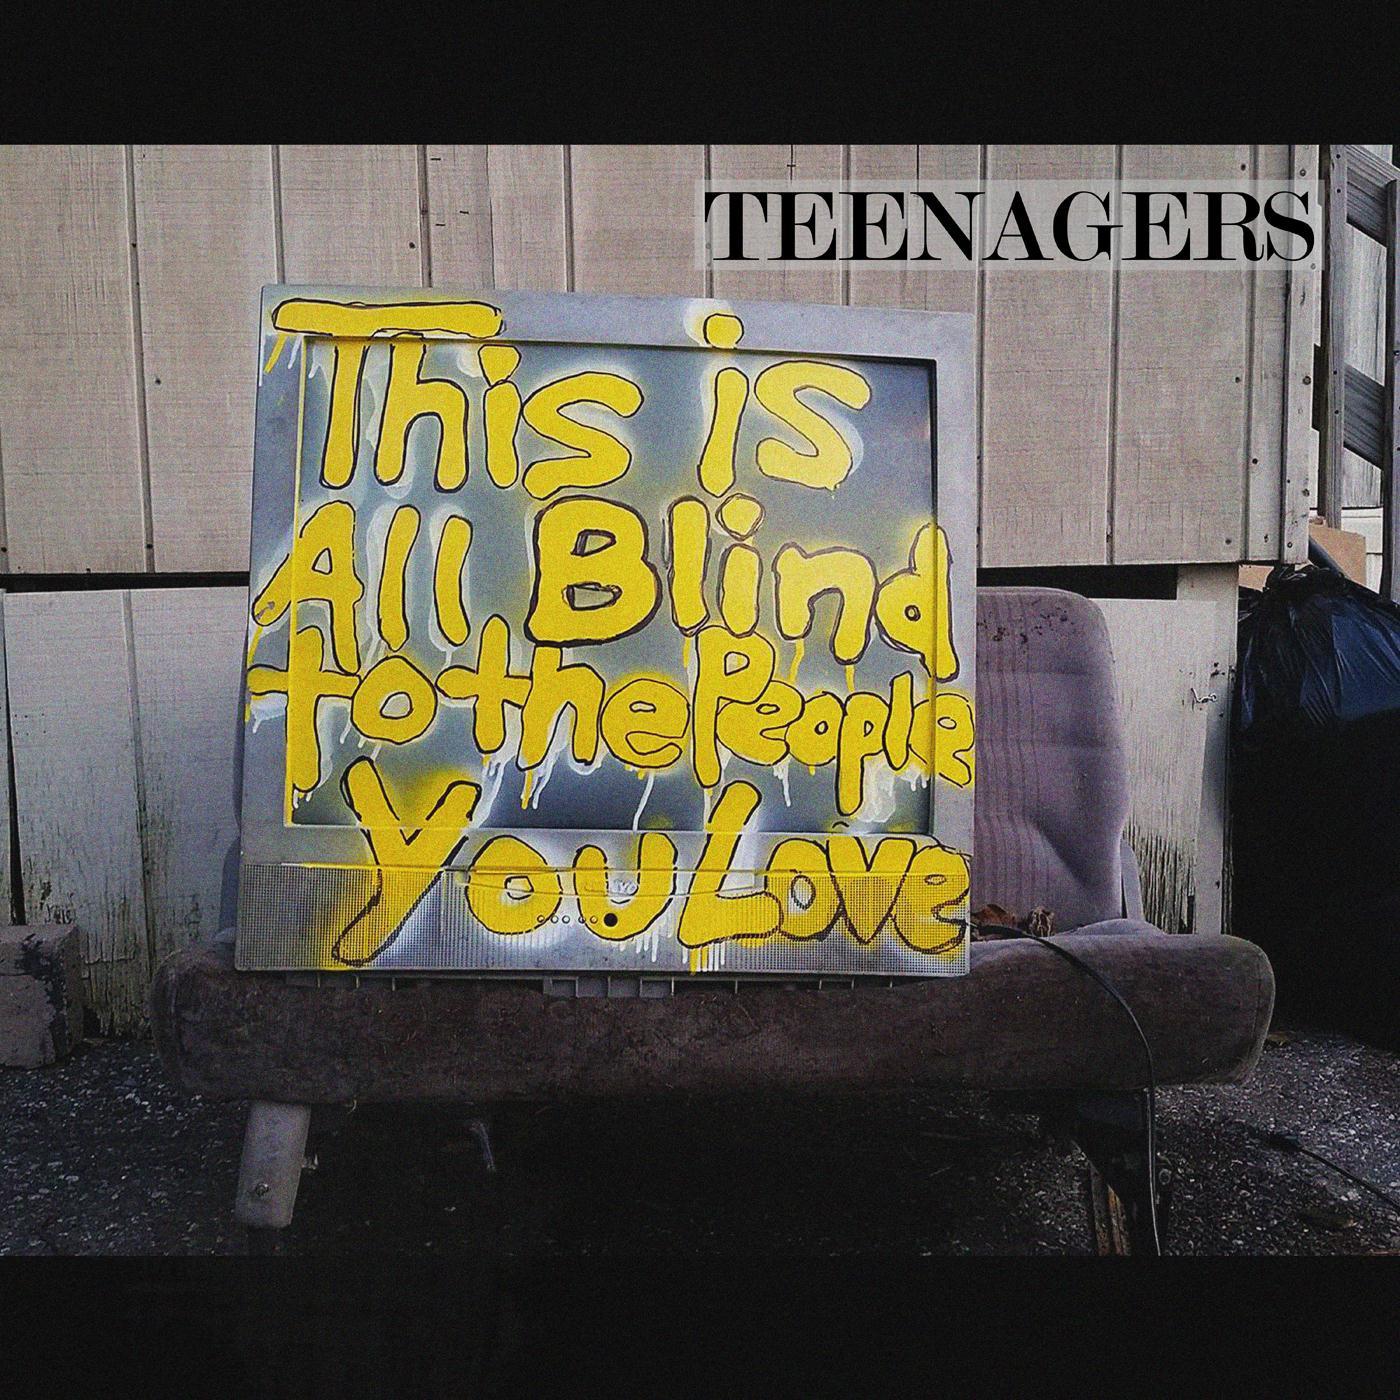 Teenagers - Black Lung